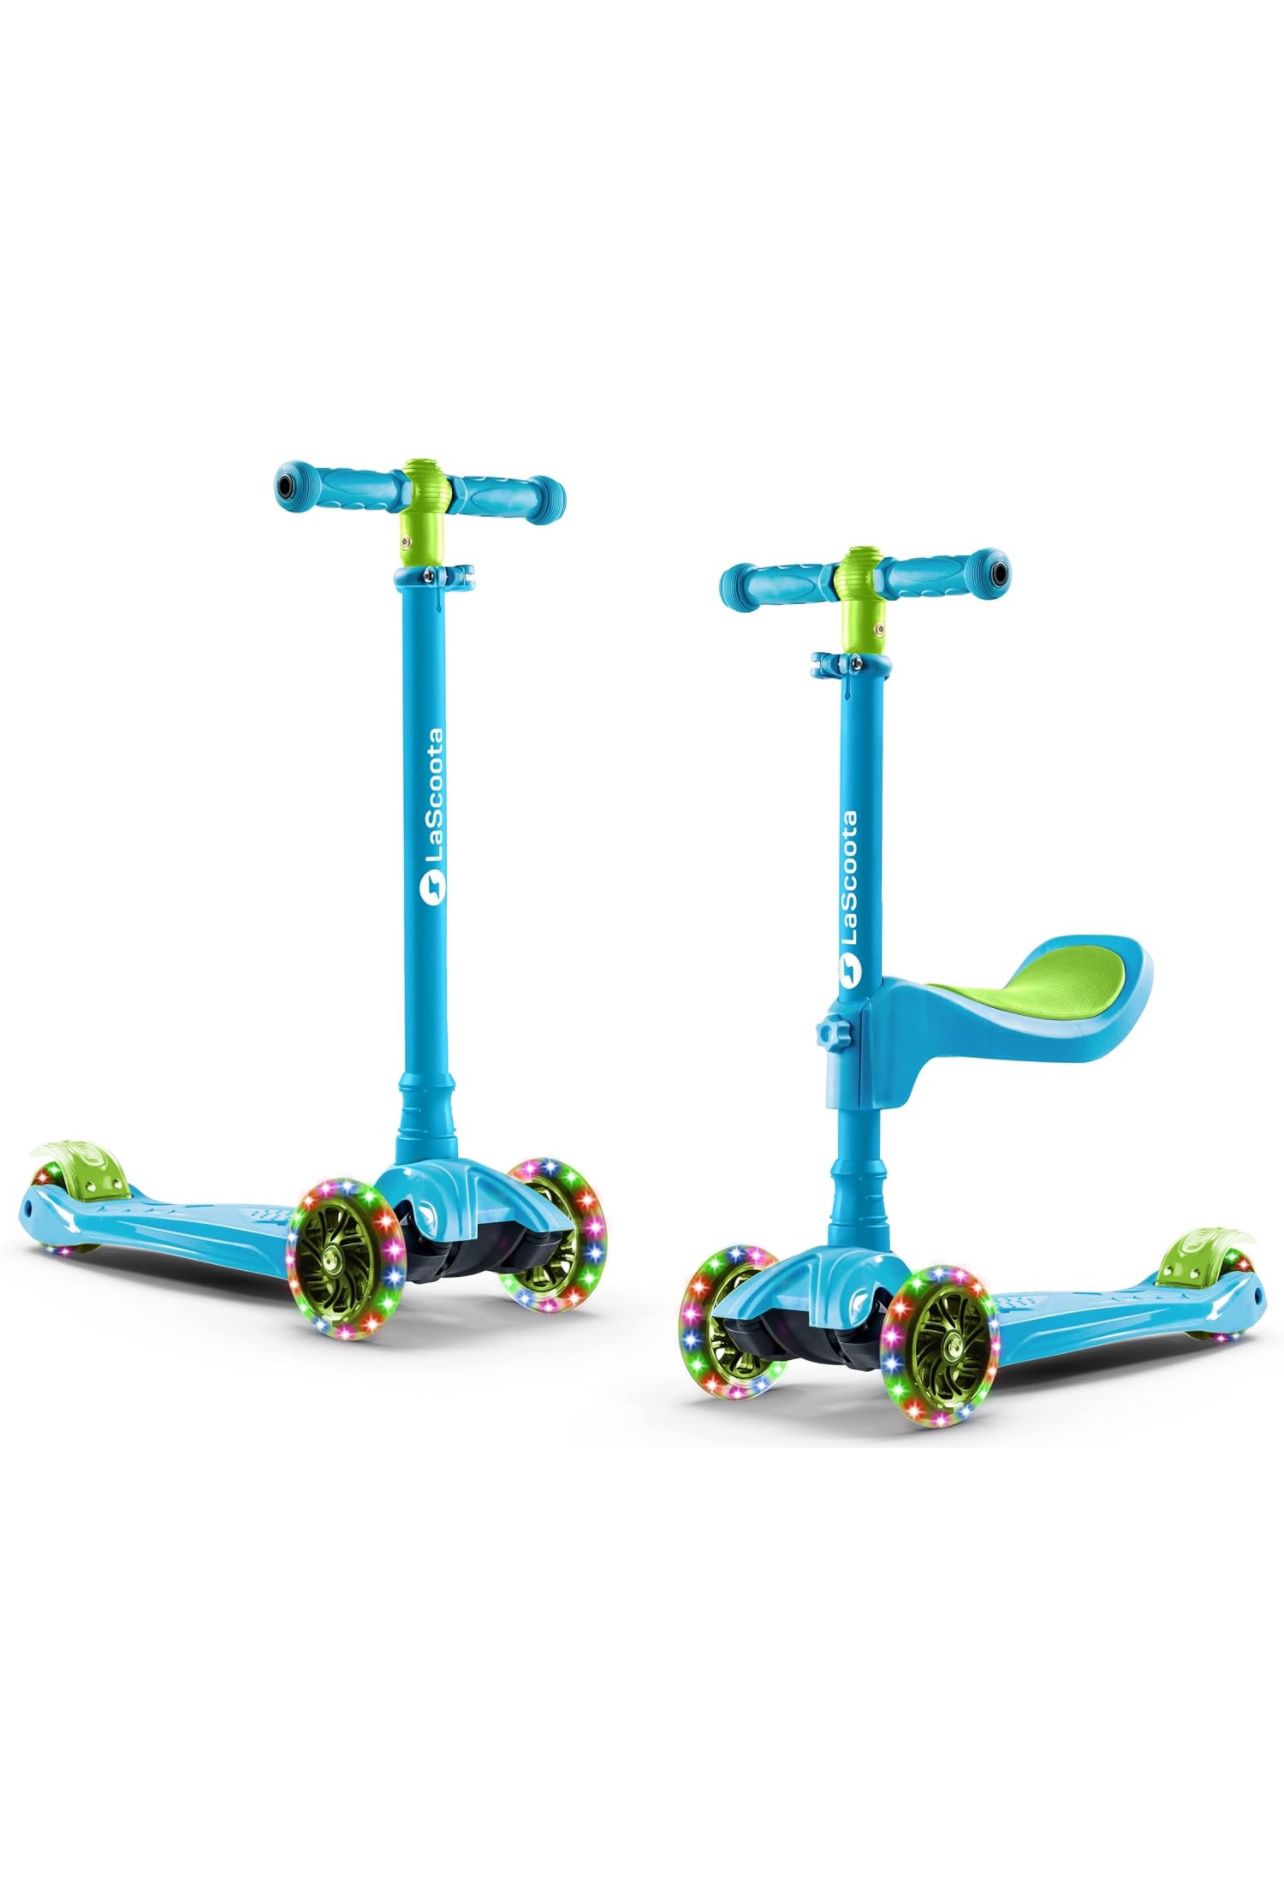 LaScoota 2-in-1 Kids Kick Scooter, Adjustable Height Handlebars and Removable Seat, 3 LED Lighted Wheels and Anti-Slip Deck, for Boys & Girls Aged 3-1